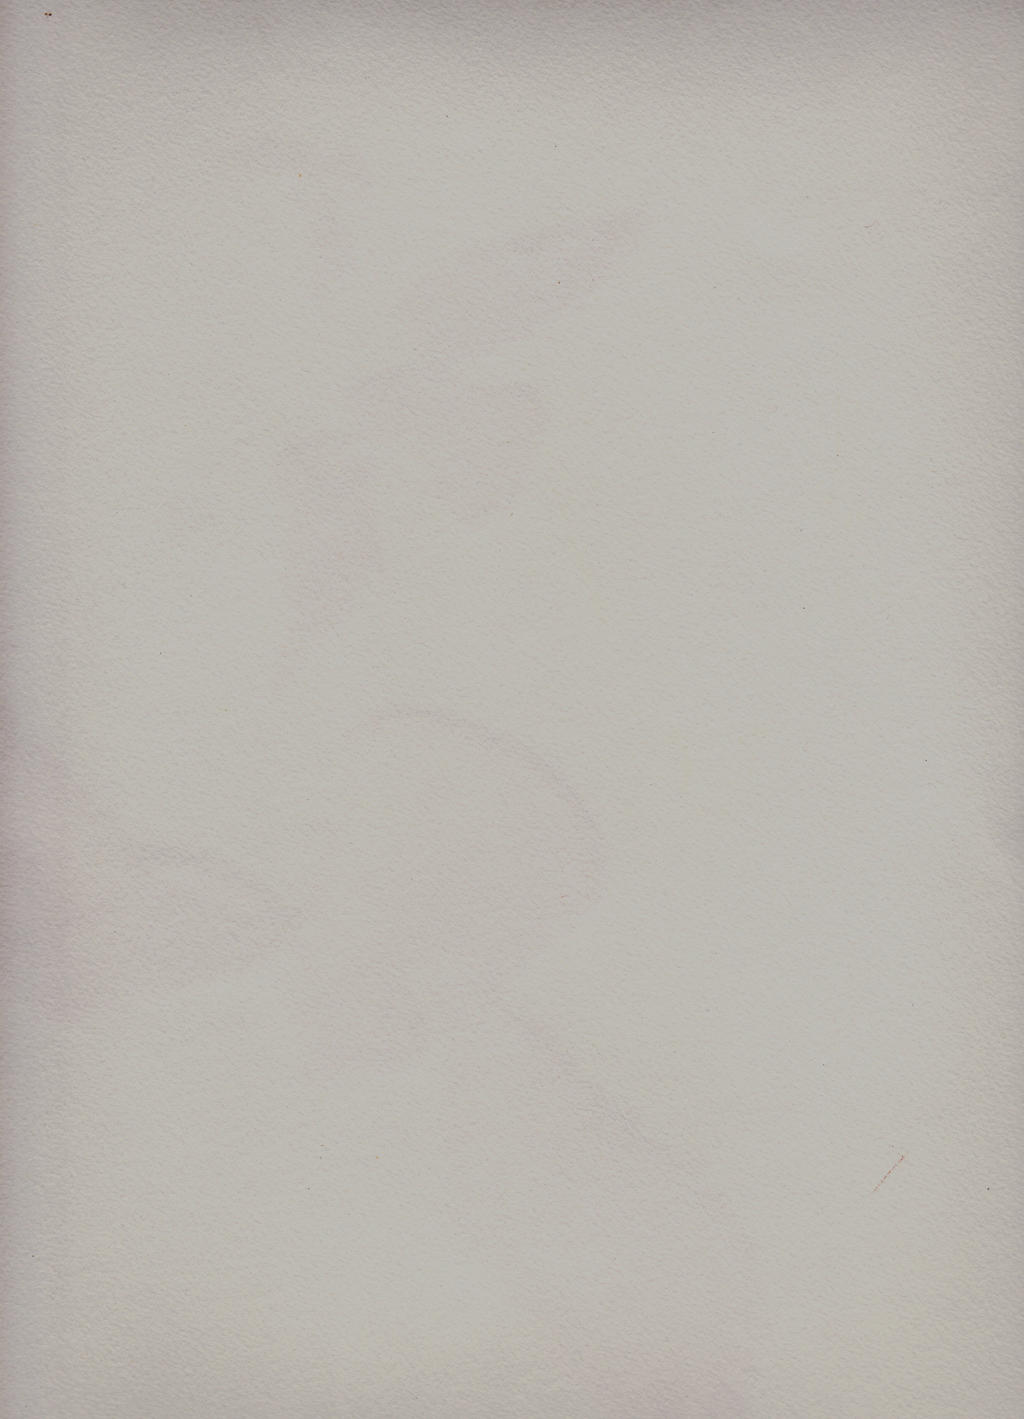 Canvas Texture White Paper by Enchantedgal-Stock on DeviantArt